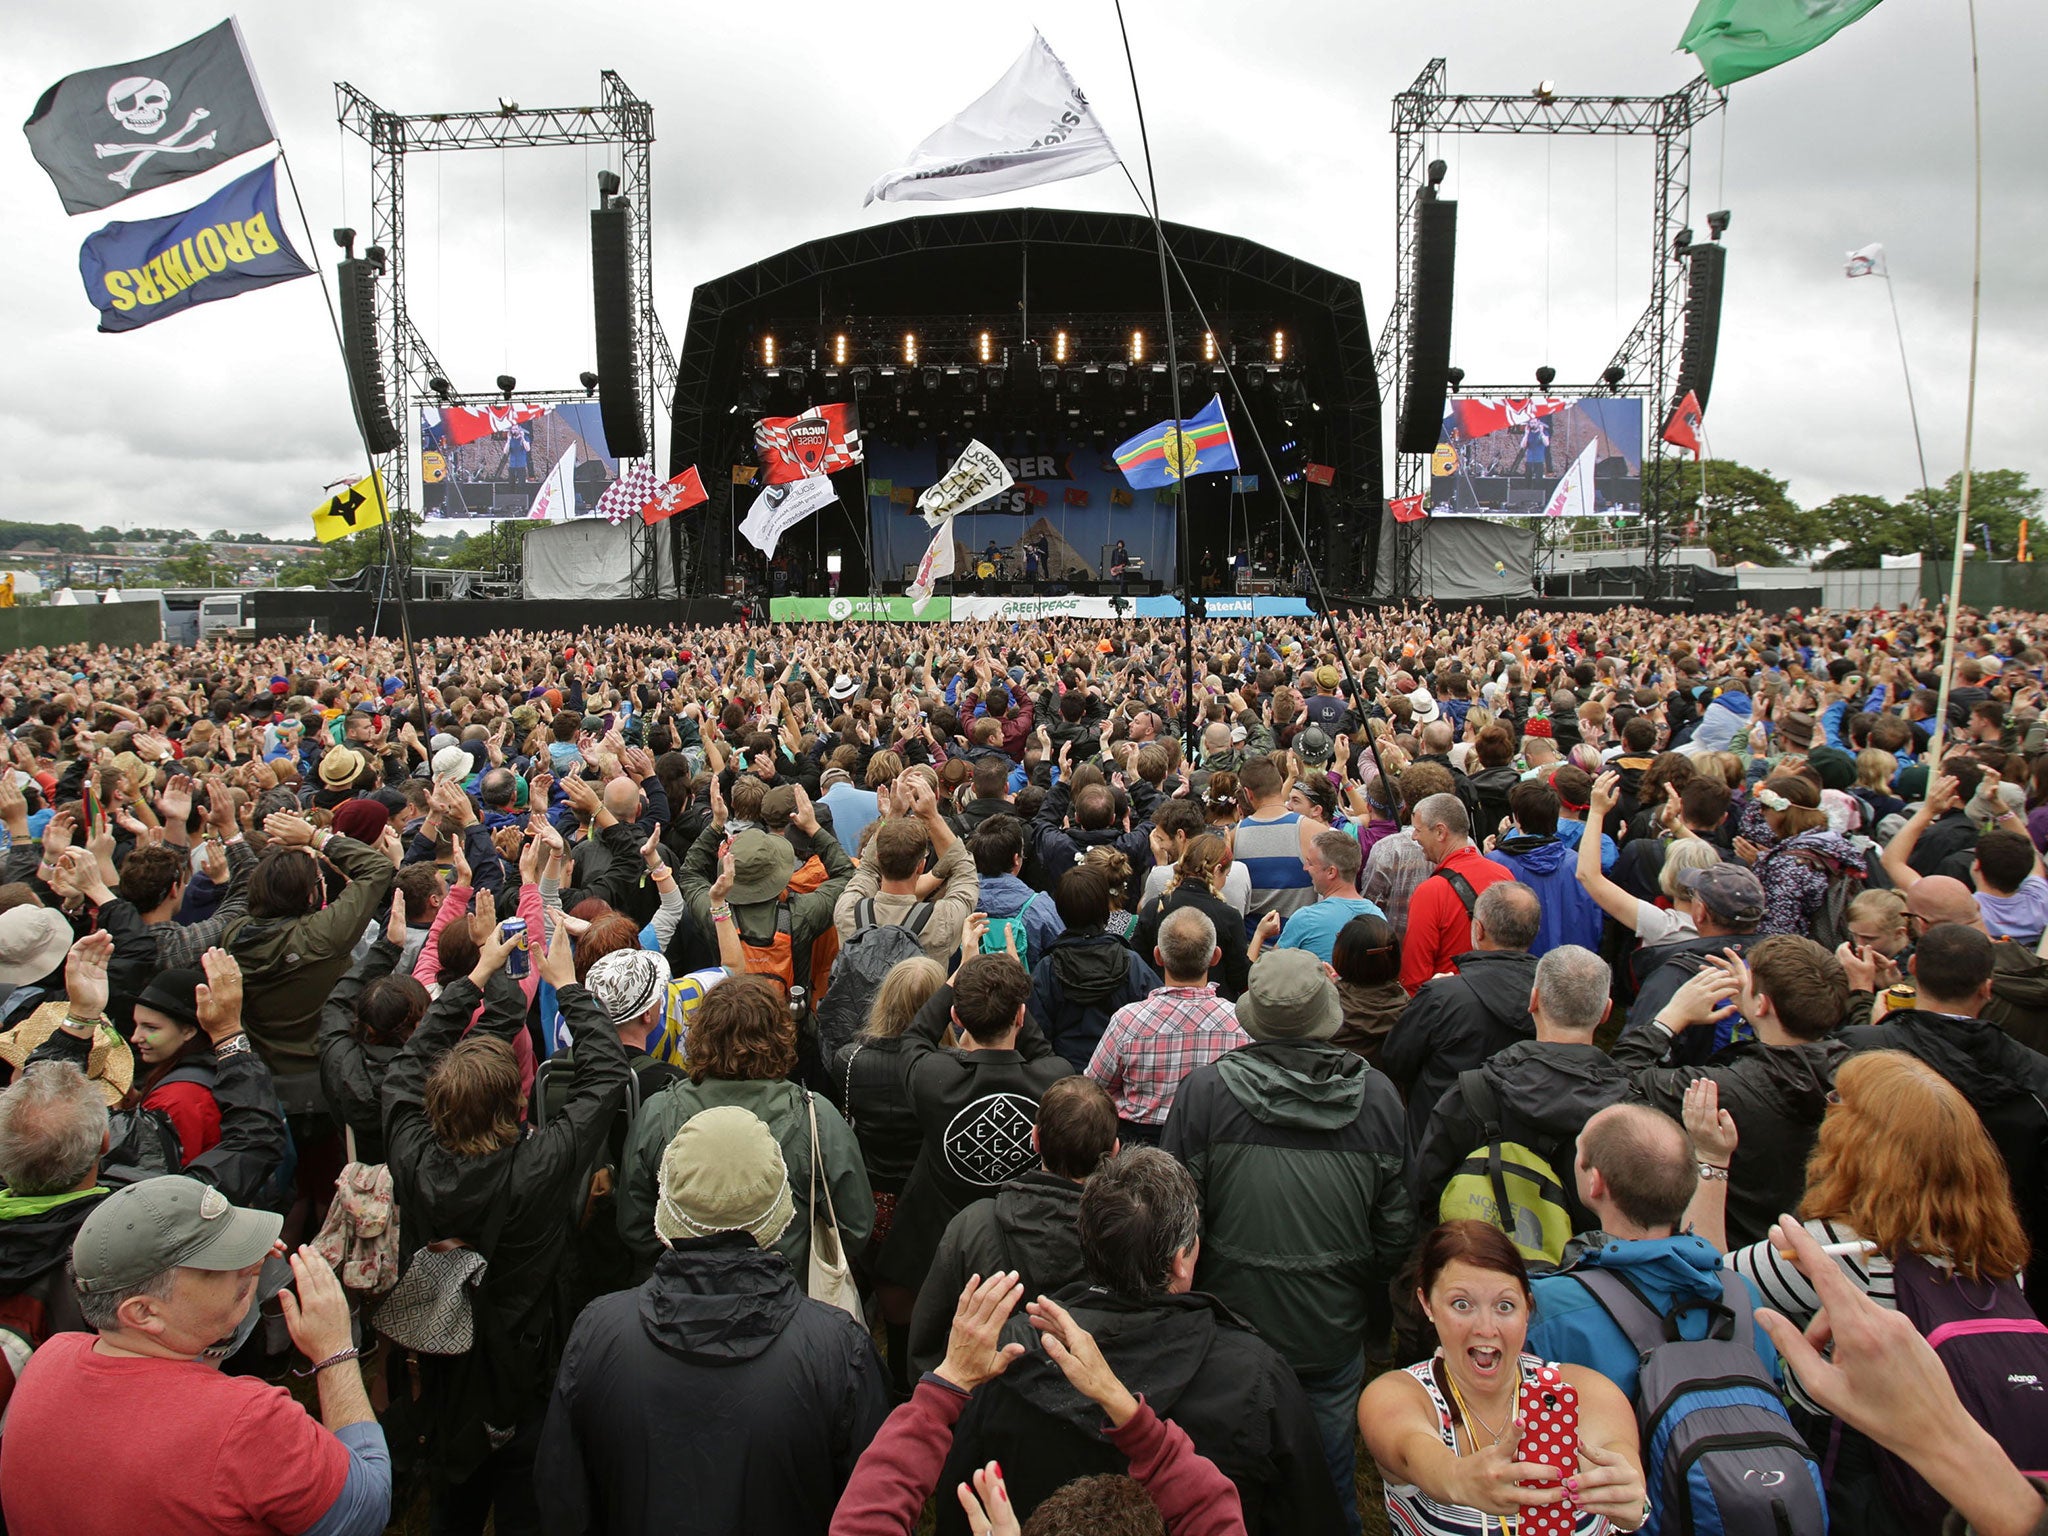 The crowd watching the Kaiser Chiefs on the Other Stage, at the Glastonbury Festival, at Worthy Farm in Somerset